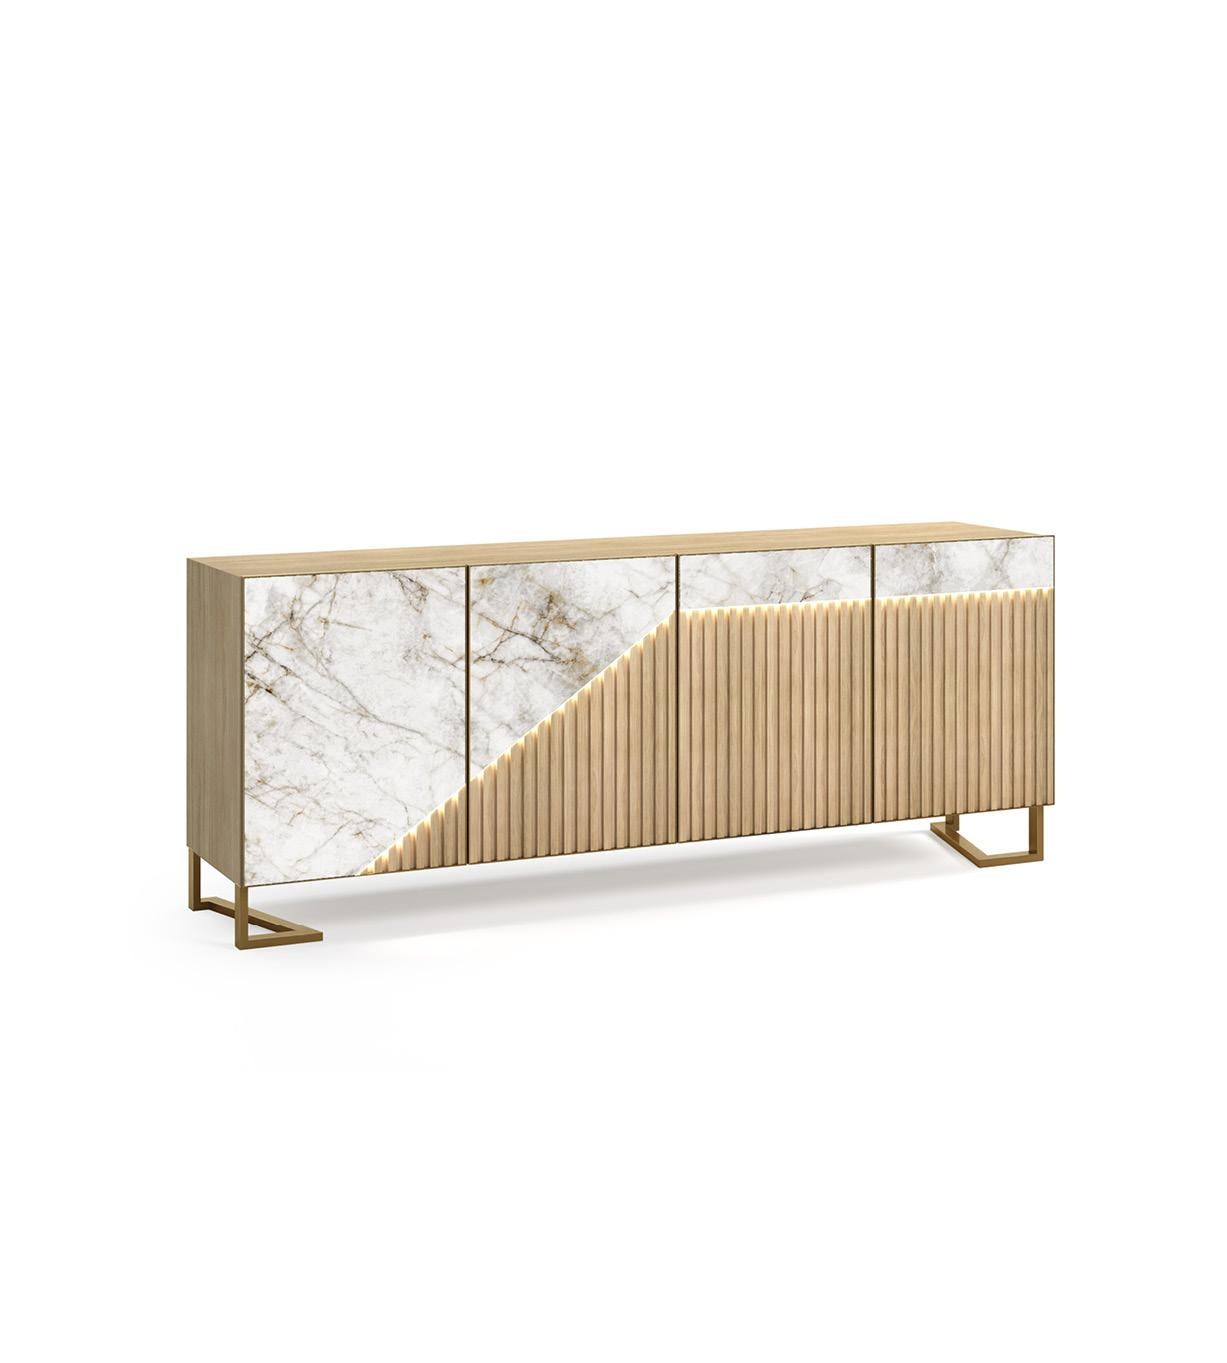 This sideboard with four doors is a perfect addition to any classic and exquisite ambiance.